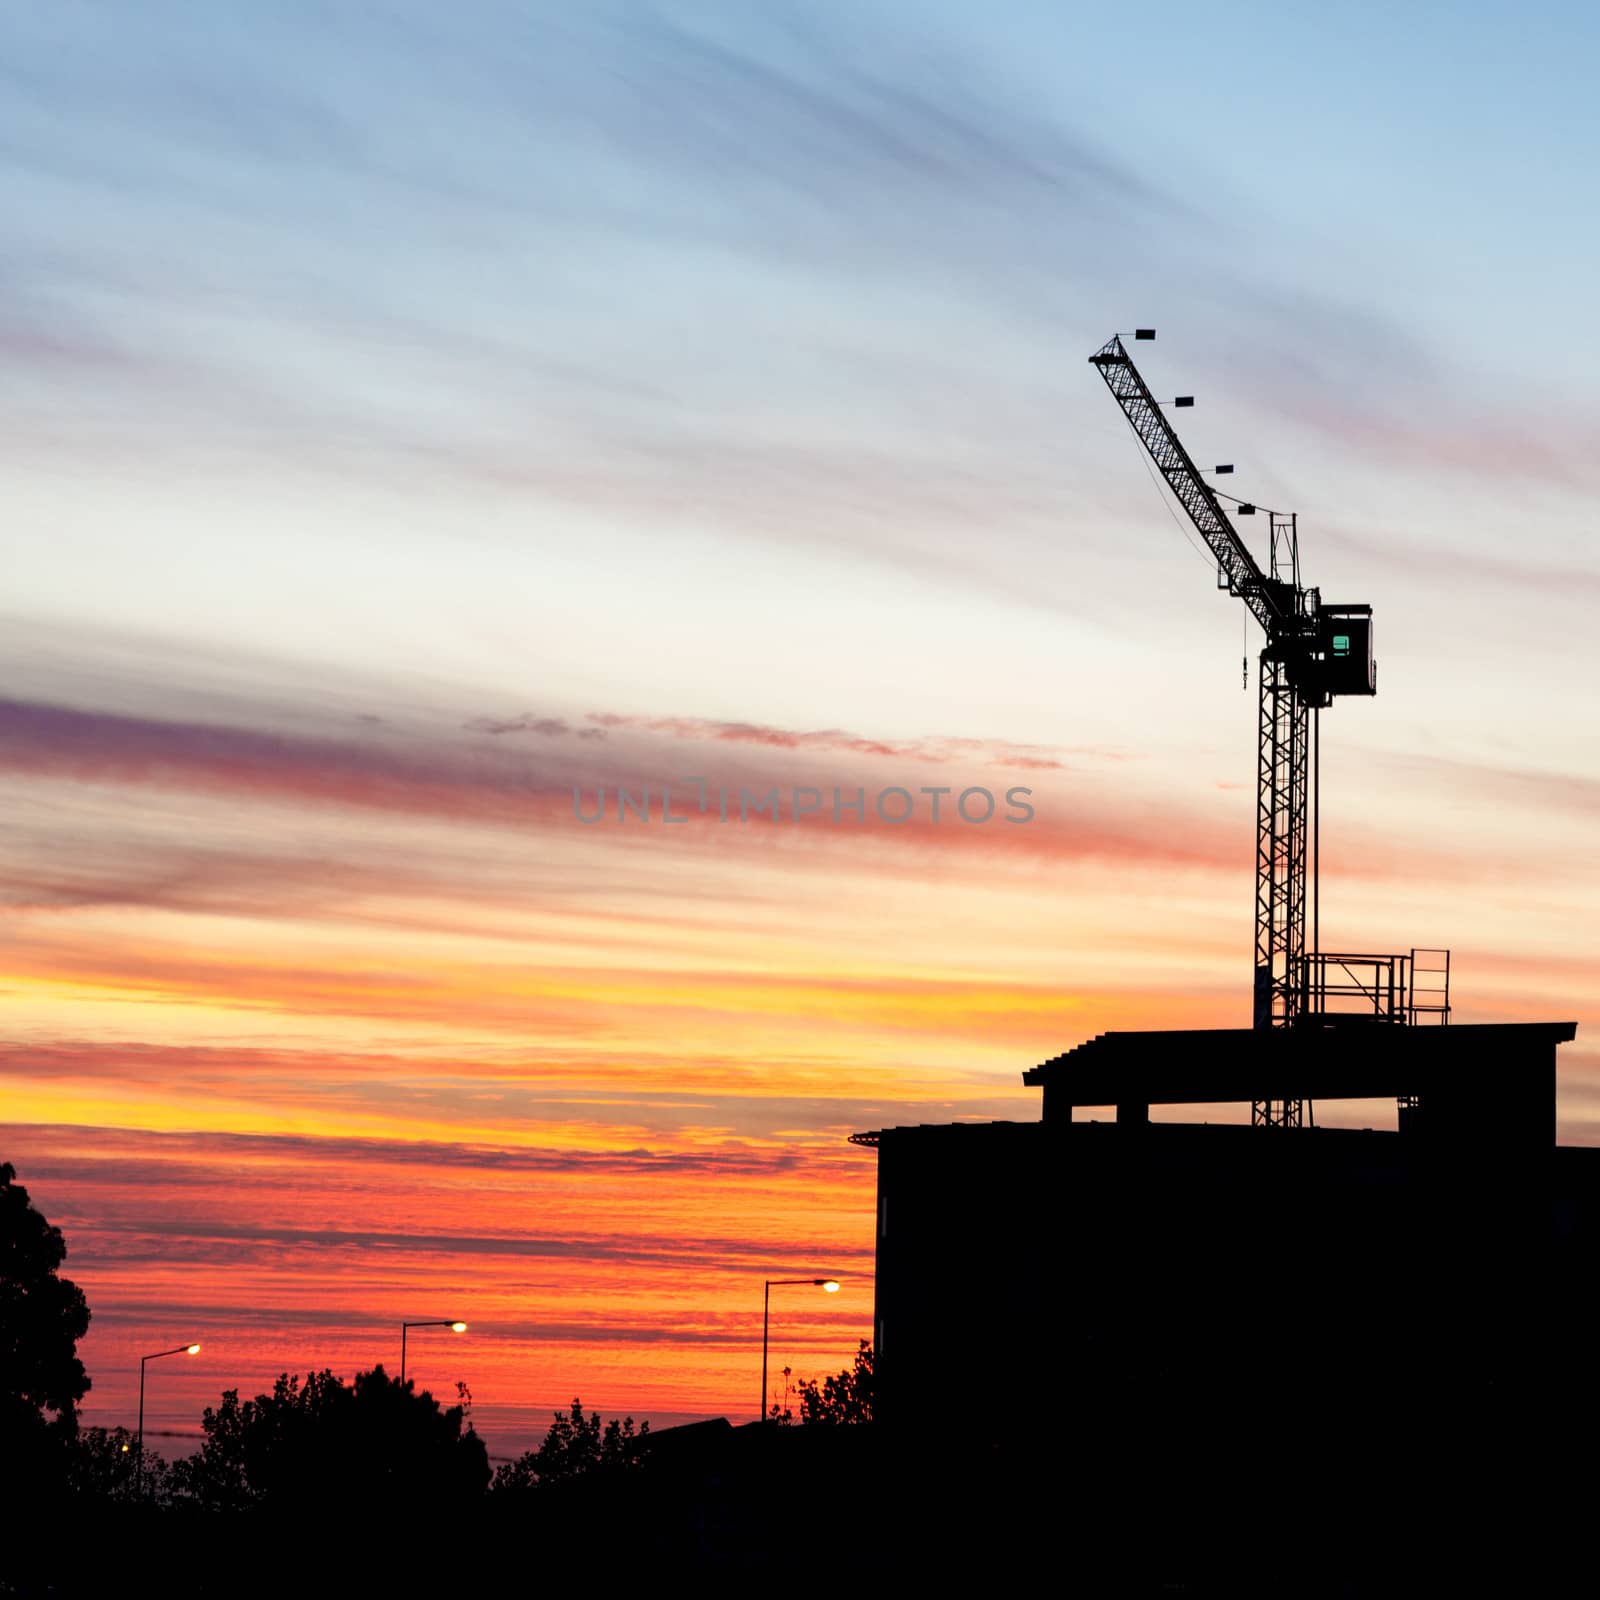 A construction crane silhouetted at sunset. (square frame)